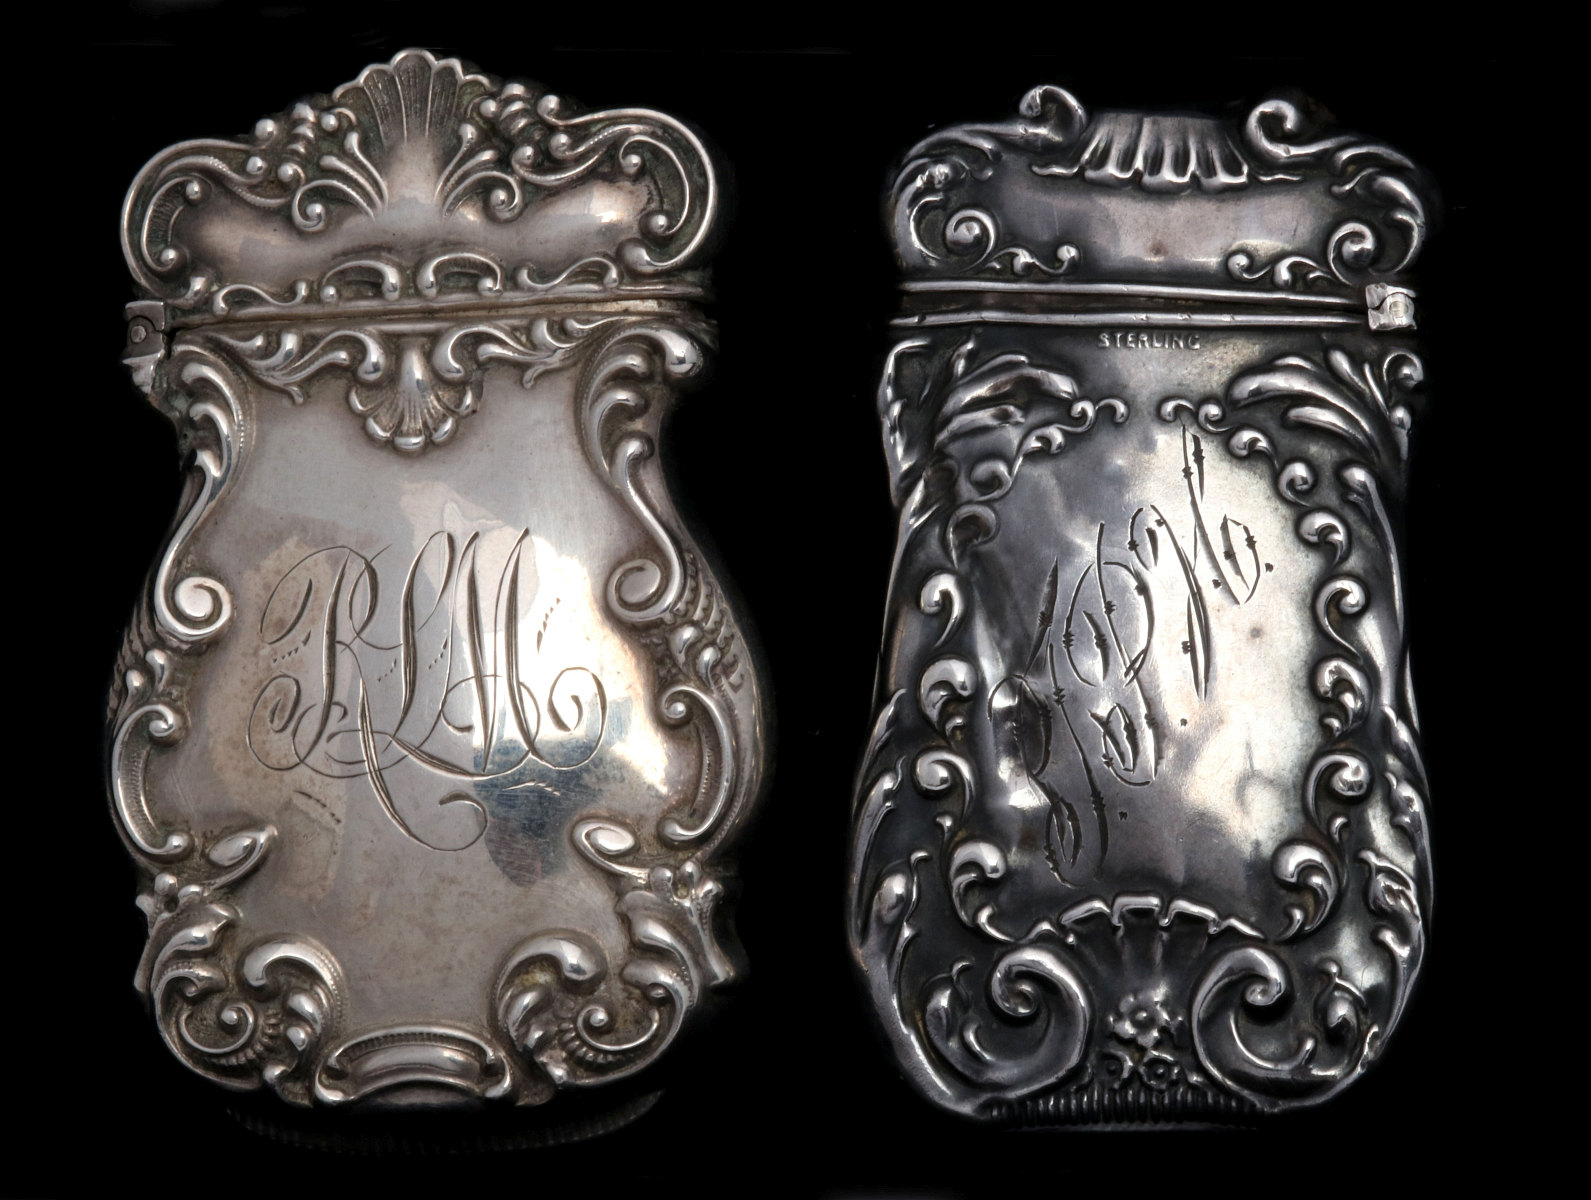 TWO ANTIQUE STERLING SILVER MATCH SAFES